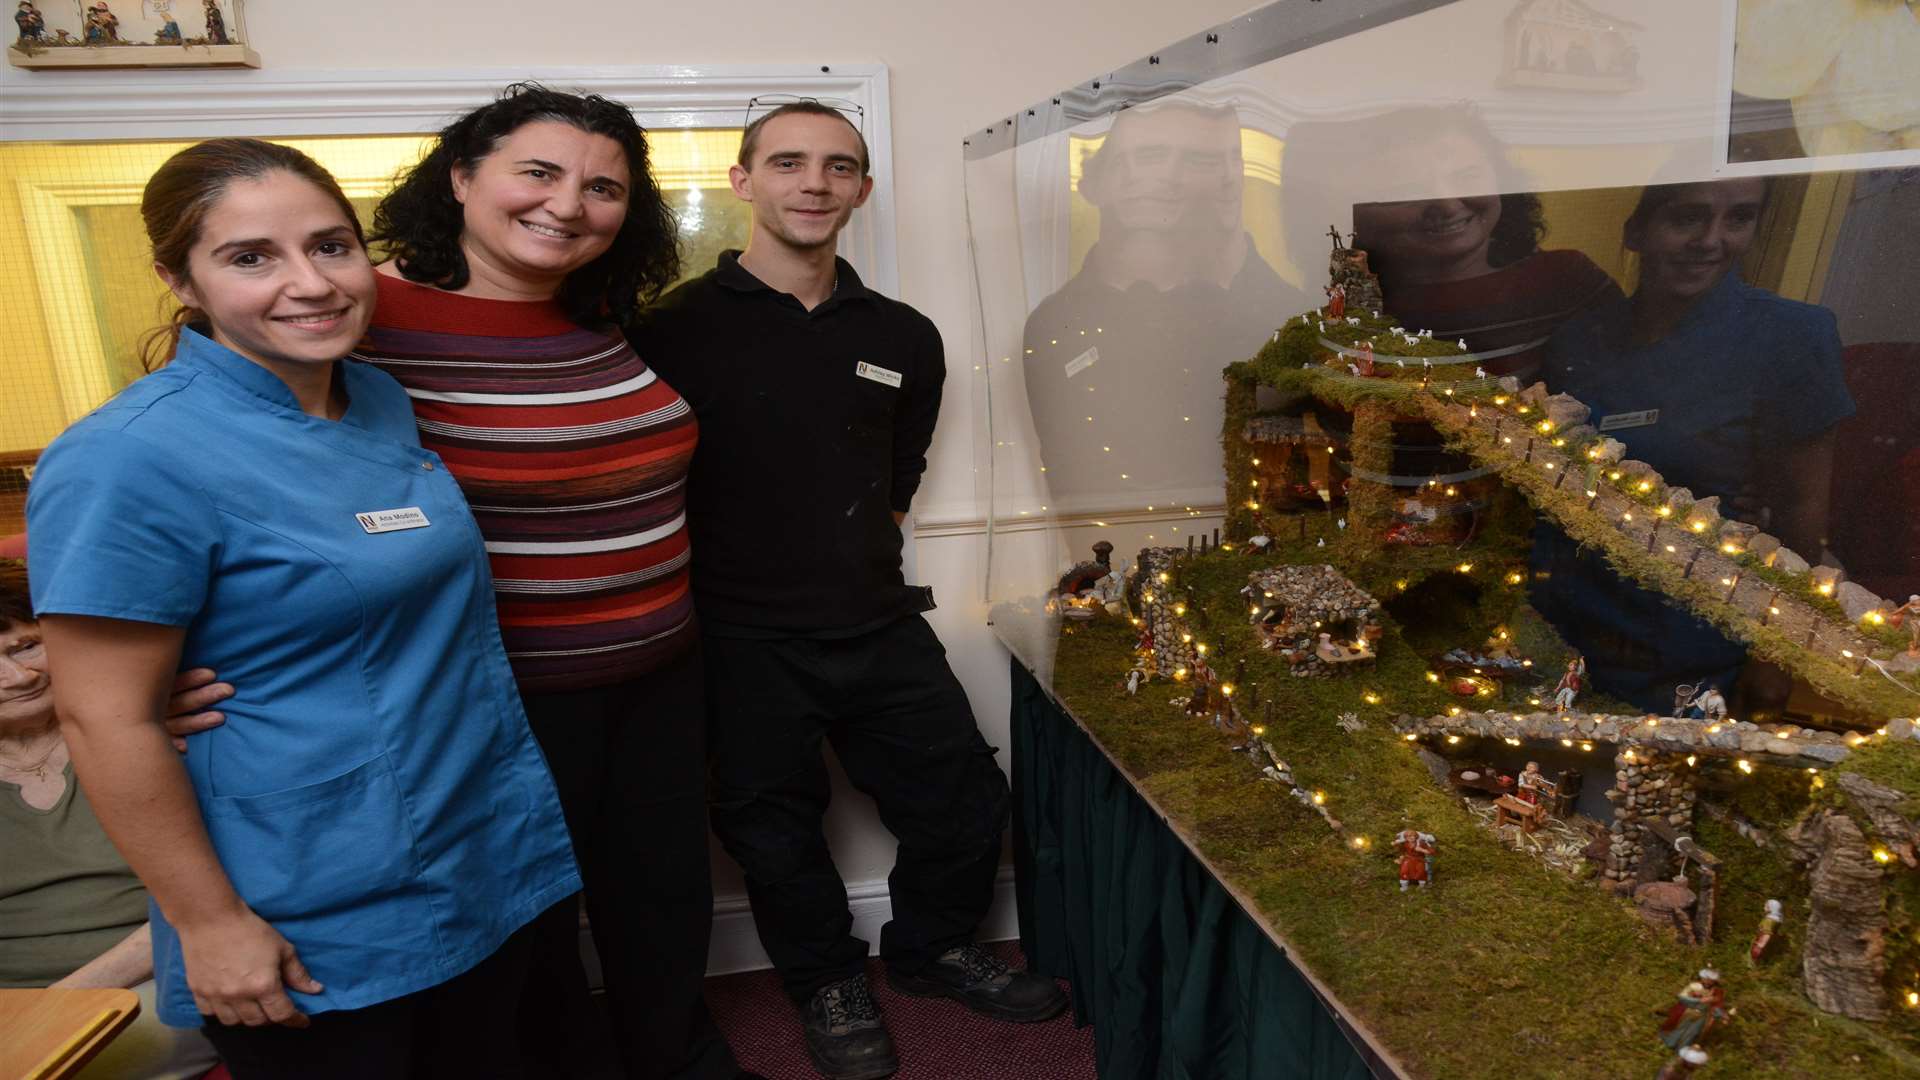 Ana Modino - Activities coordinator Teresa Franze - Manager Ashley Wilks - Maintenance With the nativity model Celebrating an Outstanding CQC report Lulworth House Residential Home Picture: Gary Browne FM5015183